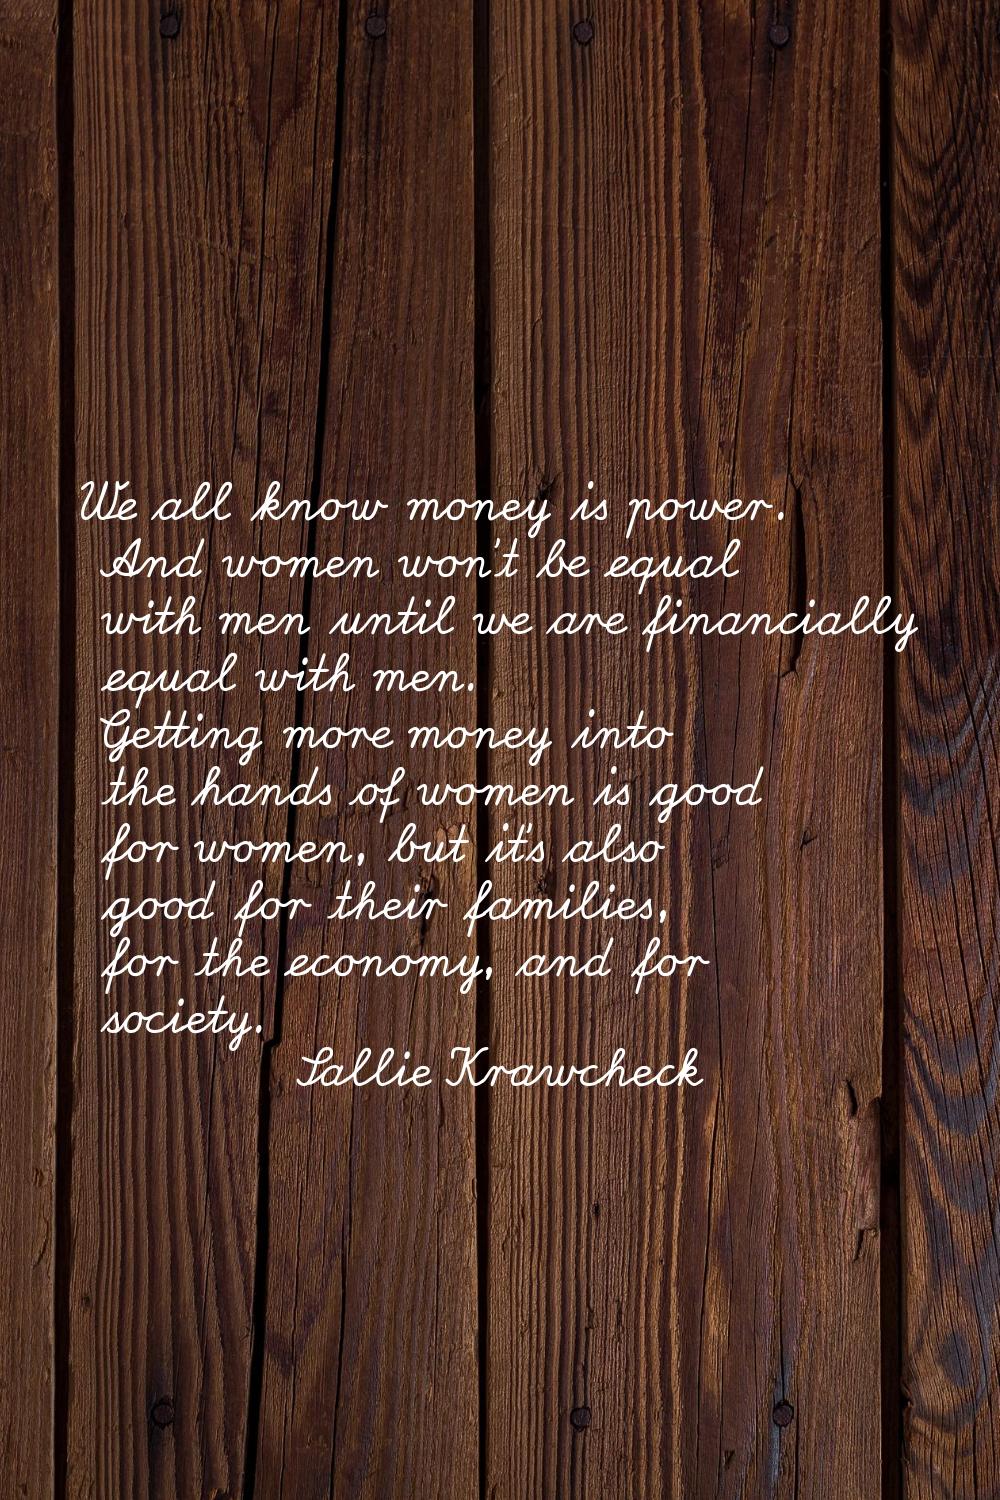 We all know money is power. And women won't be equal with men until we are financially equal with m